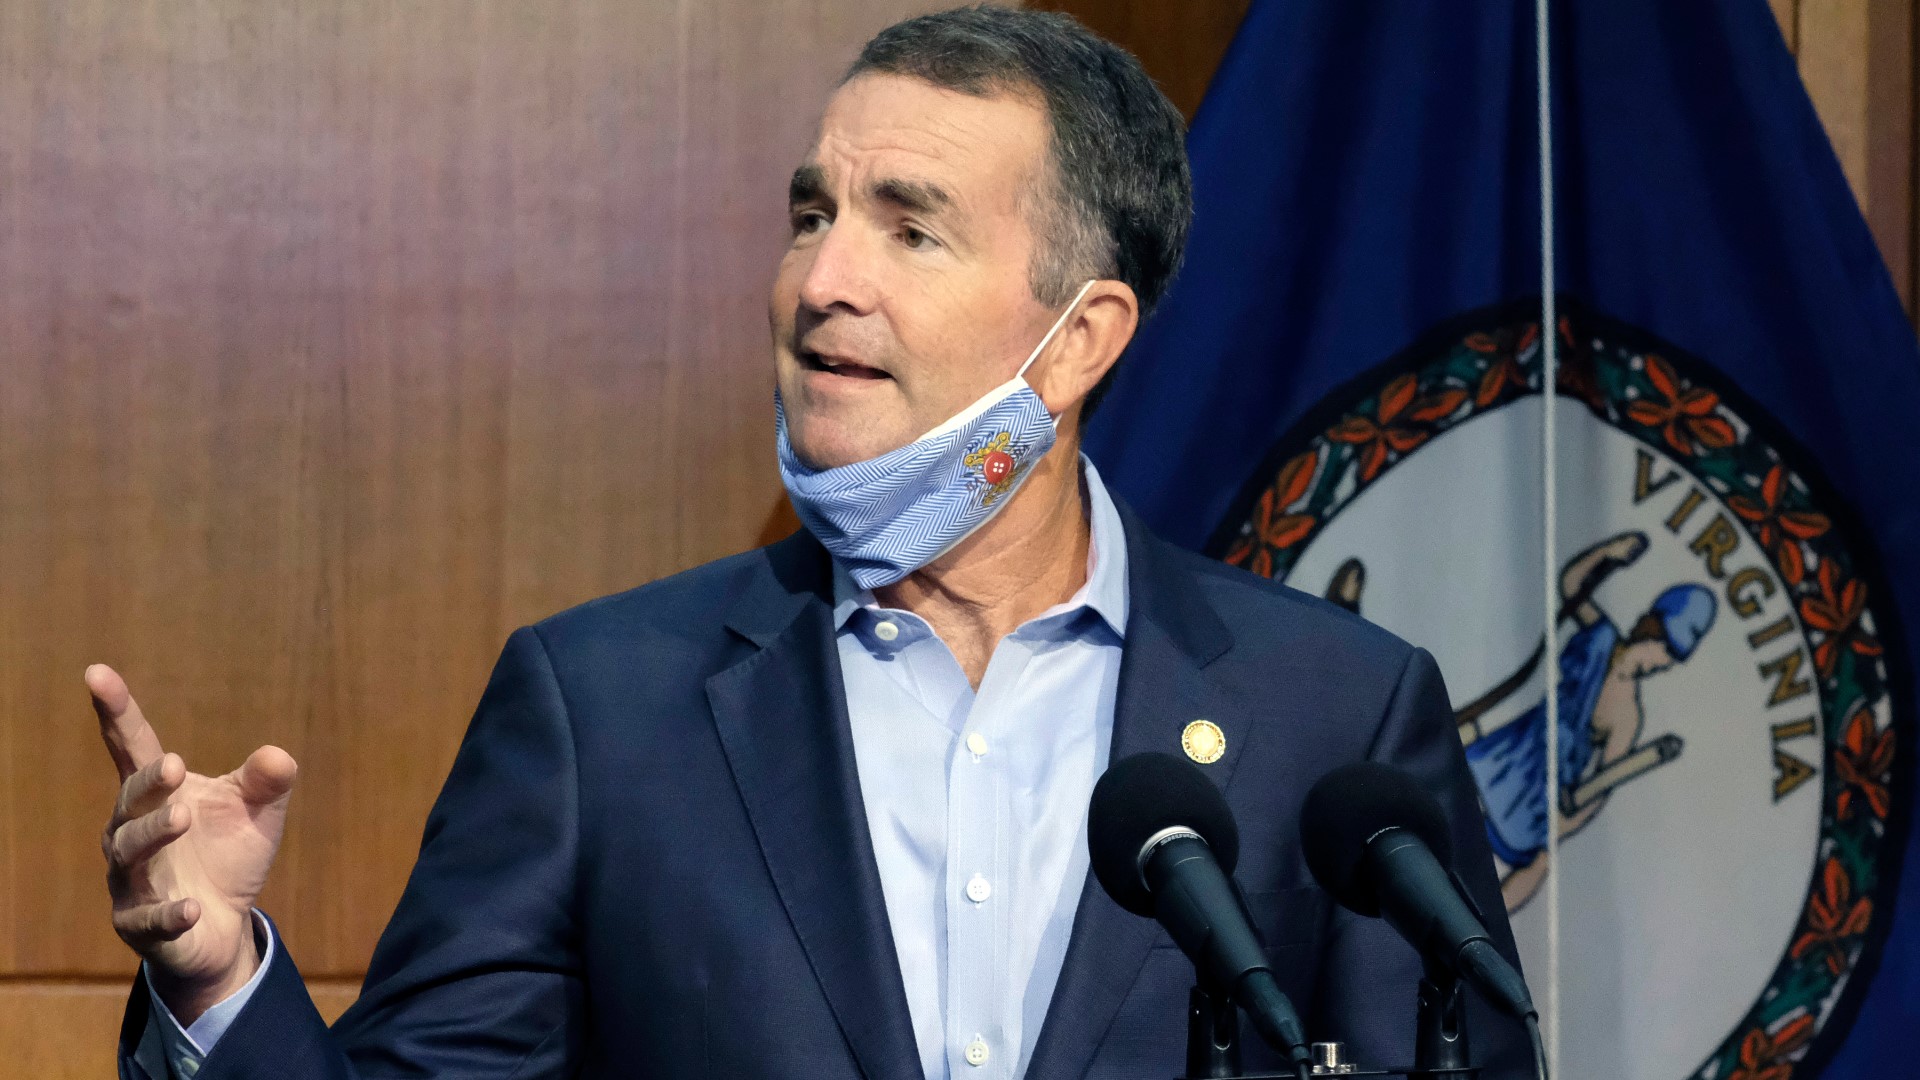 It was not immediately clear whether talk of targeting Virginia’s Democratic governor went beyond the June meeting.